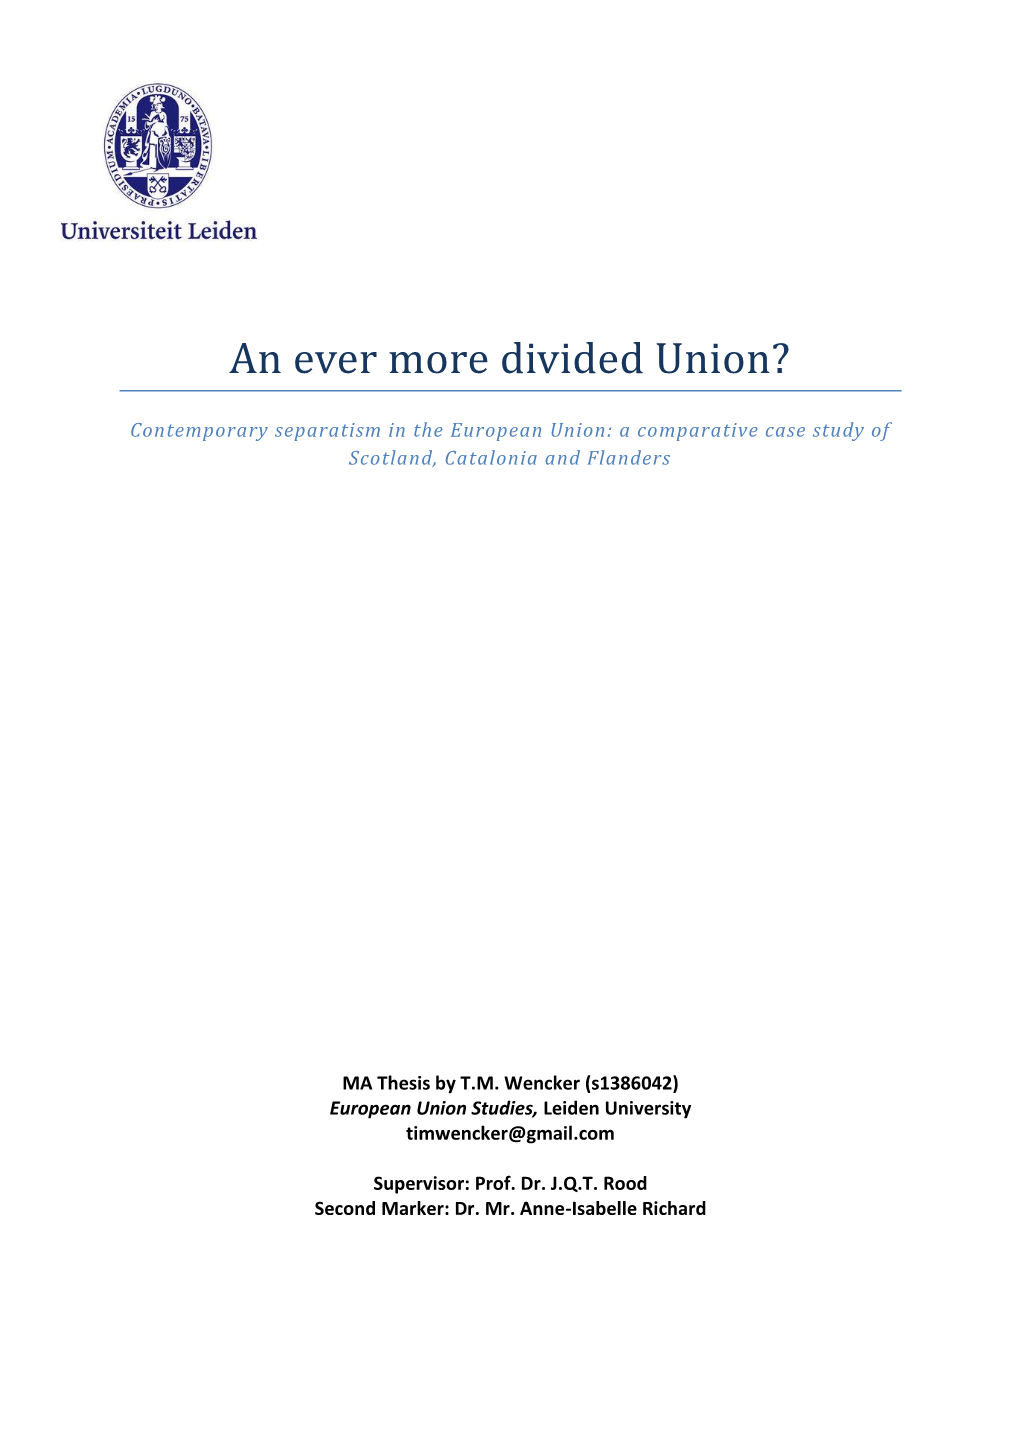 An Ever More Divided Union?